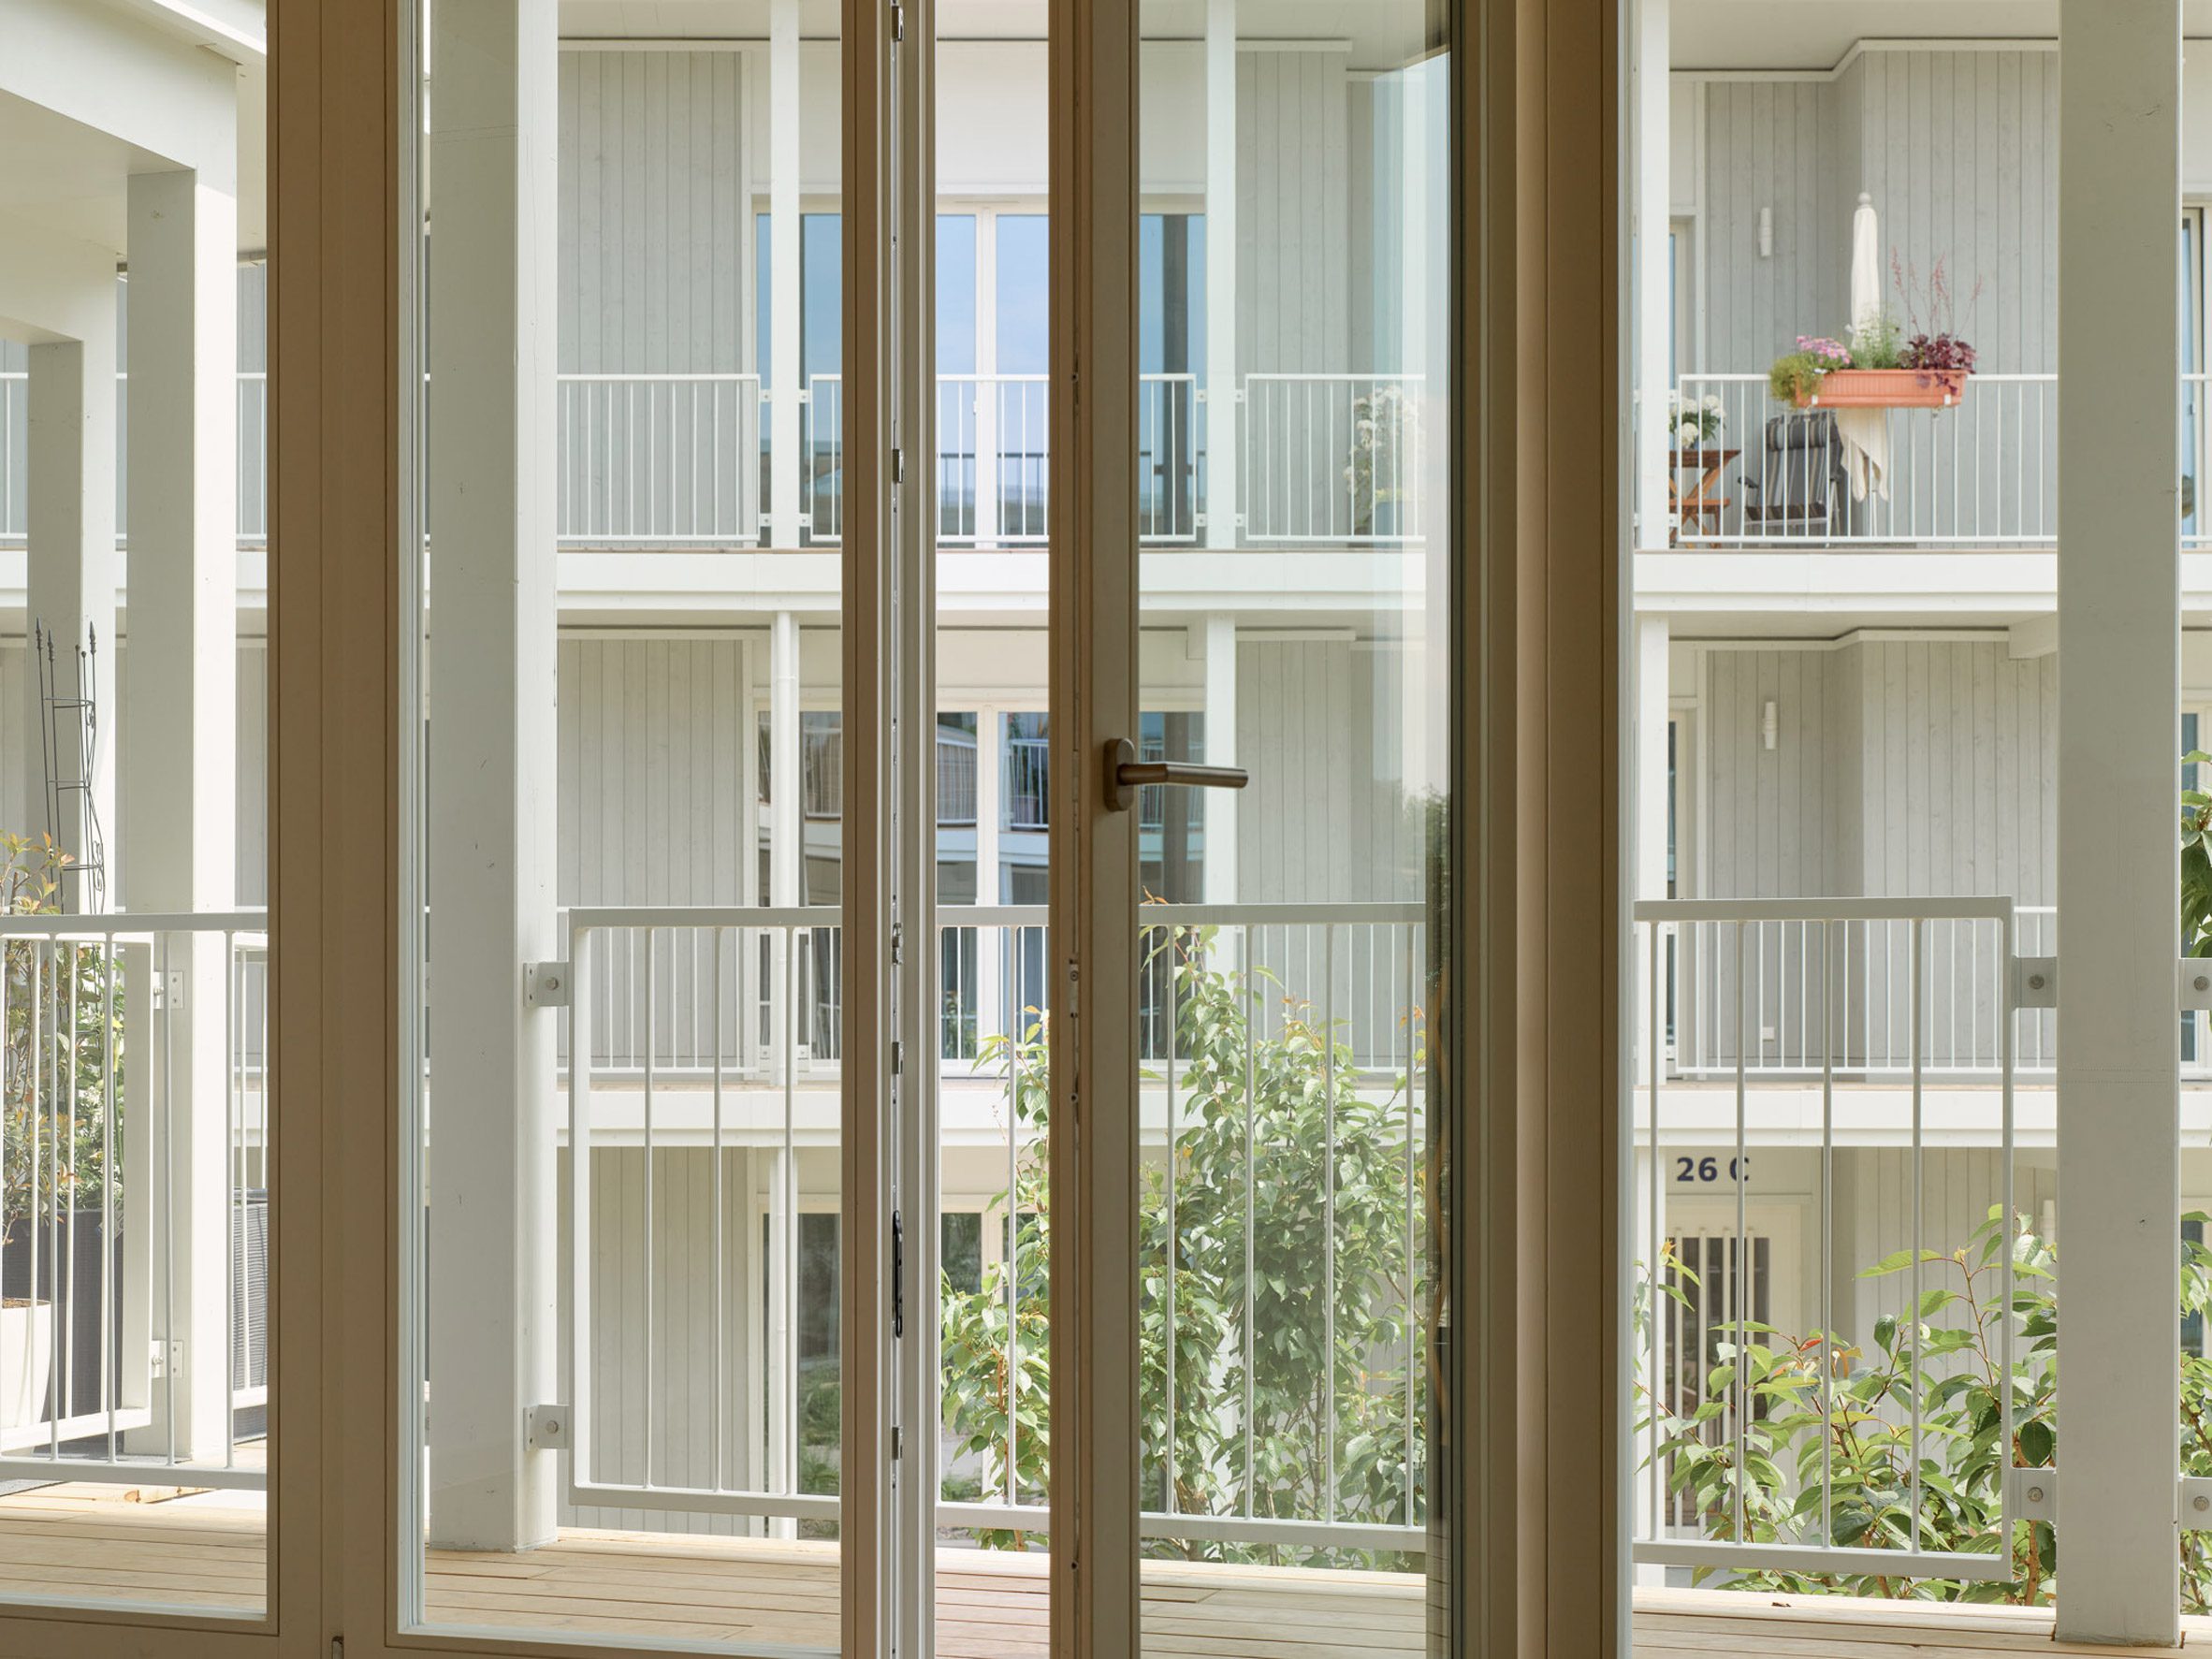 Glass doors opening onto a covered walkway in a multi-generational housing project